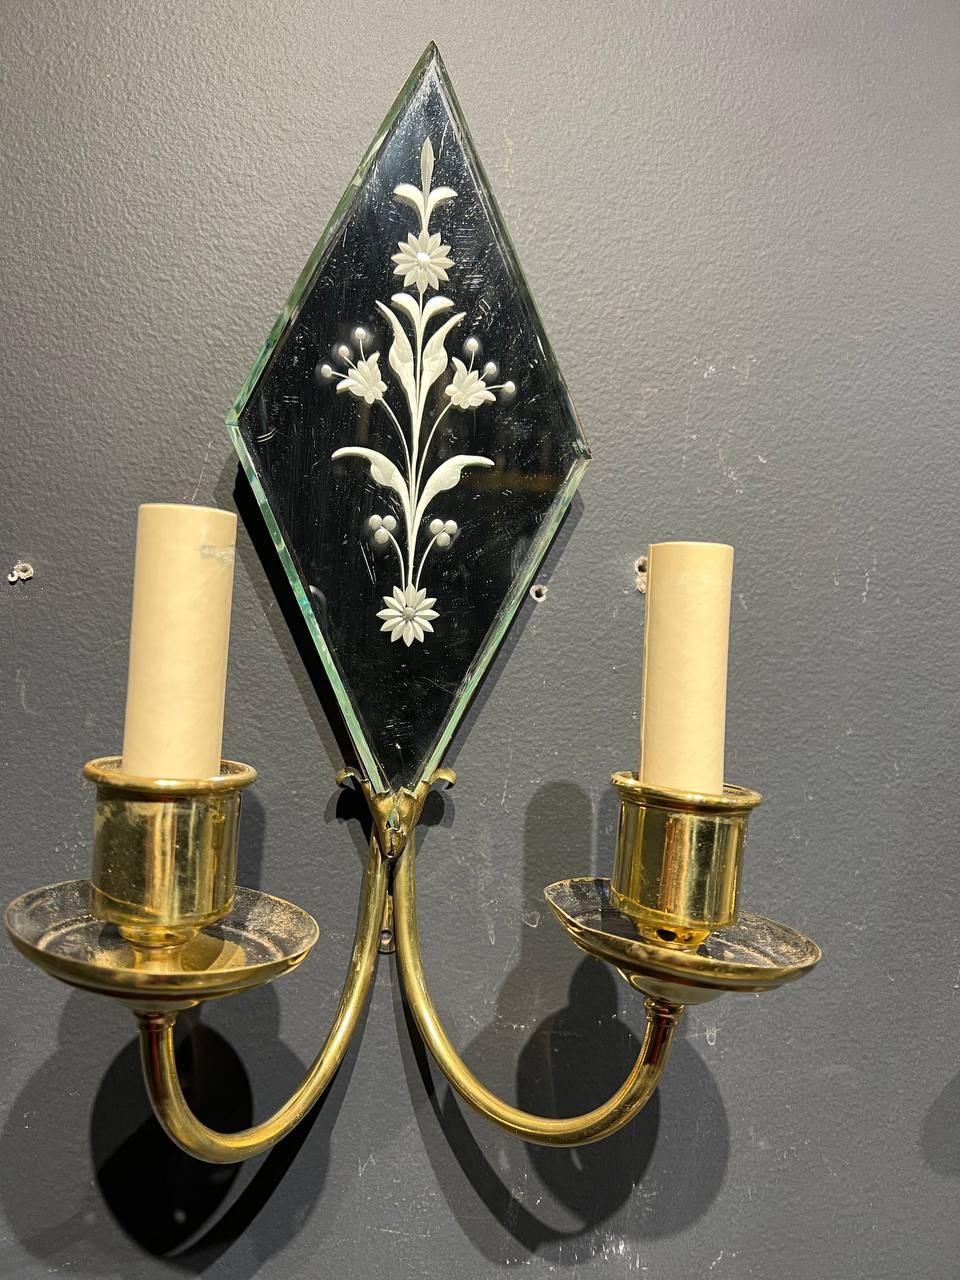 American Classical 1920's Caldwell Mirror With Etched Flowers Sconces For Sale